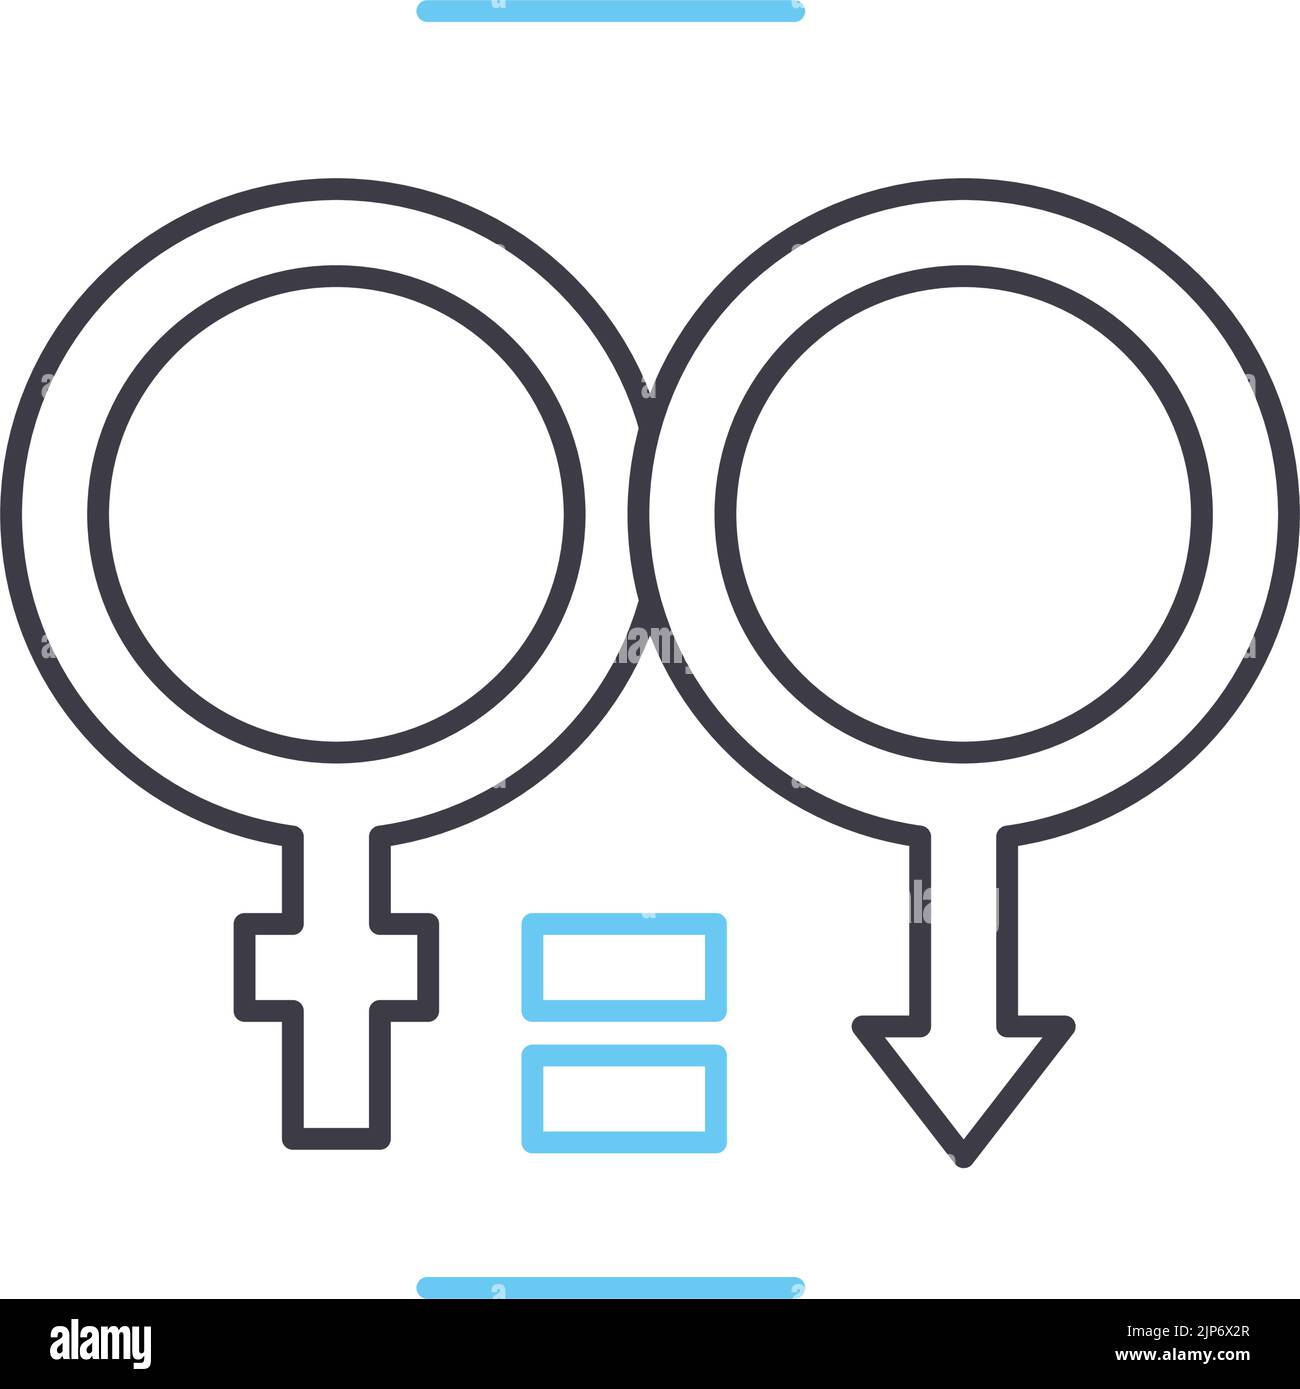 equal rights line icon, outline symbol, vector illustration, concept sign Stock Vector